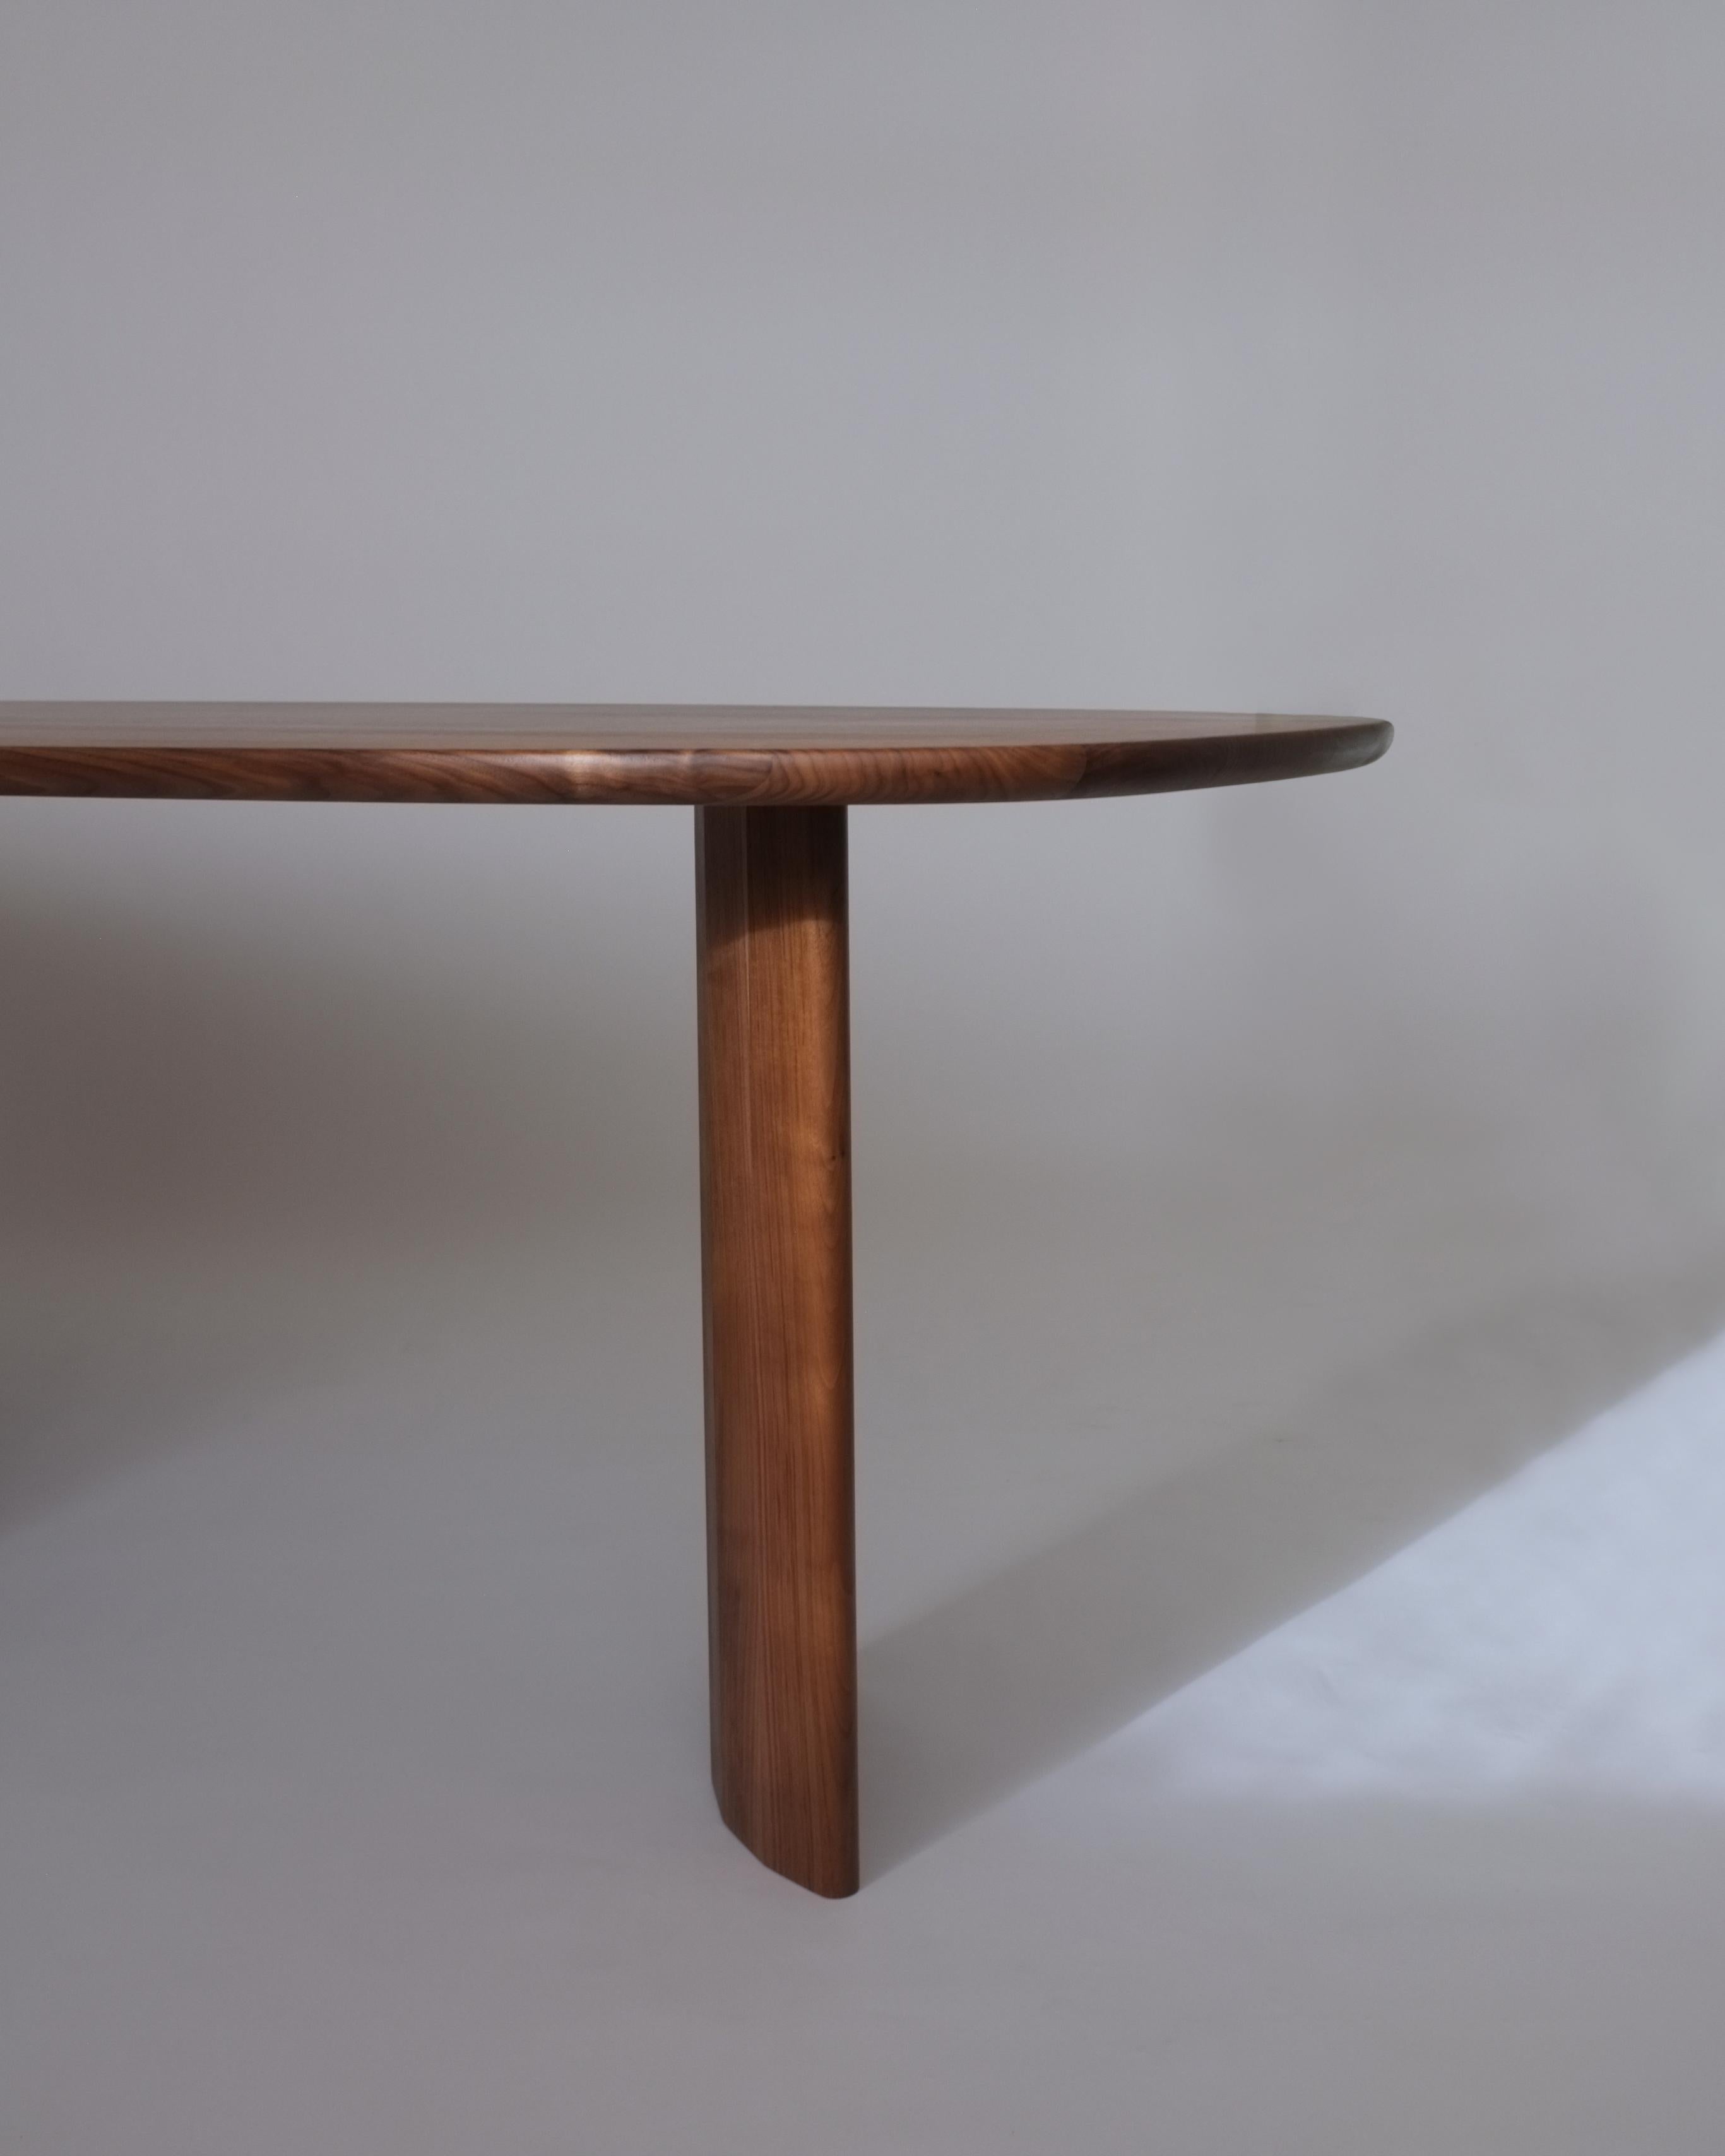 Modern Contemporary Organic Sculptural Walnut Wood Dining Table for Richard by Campagna